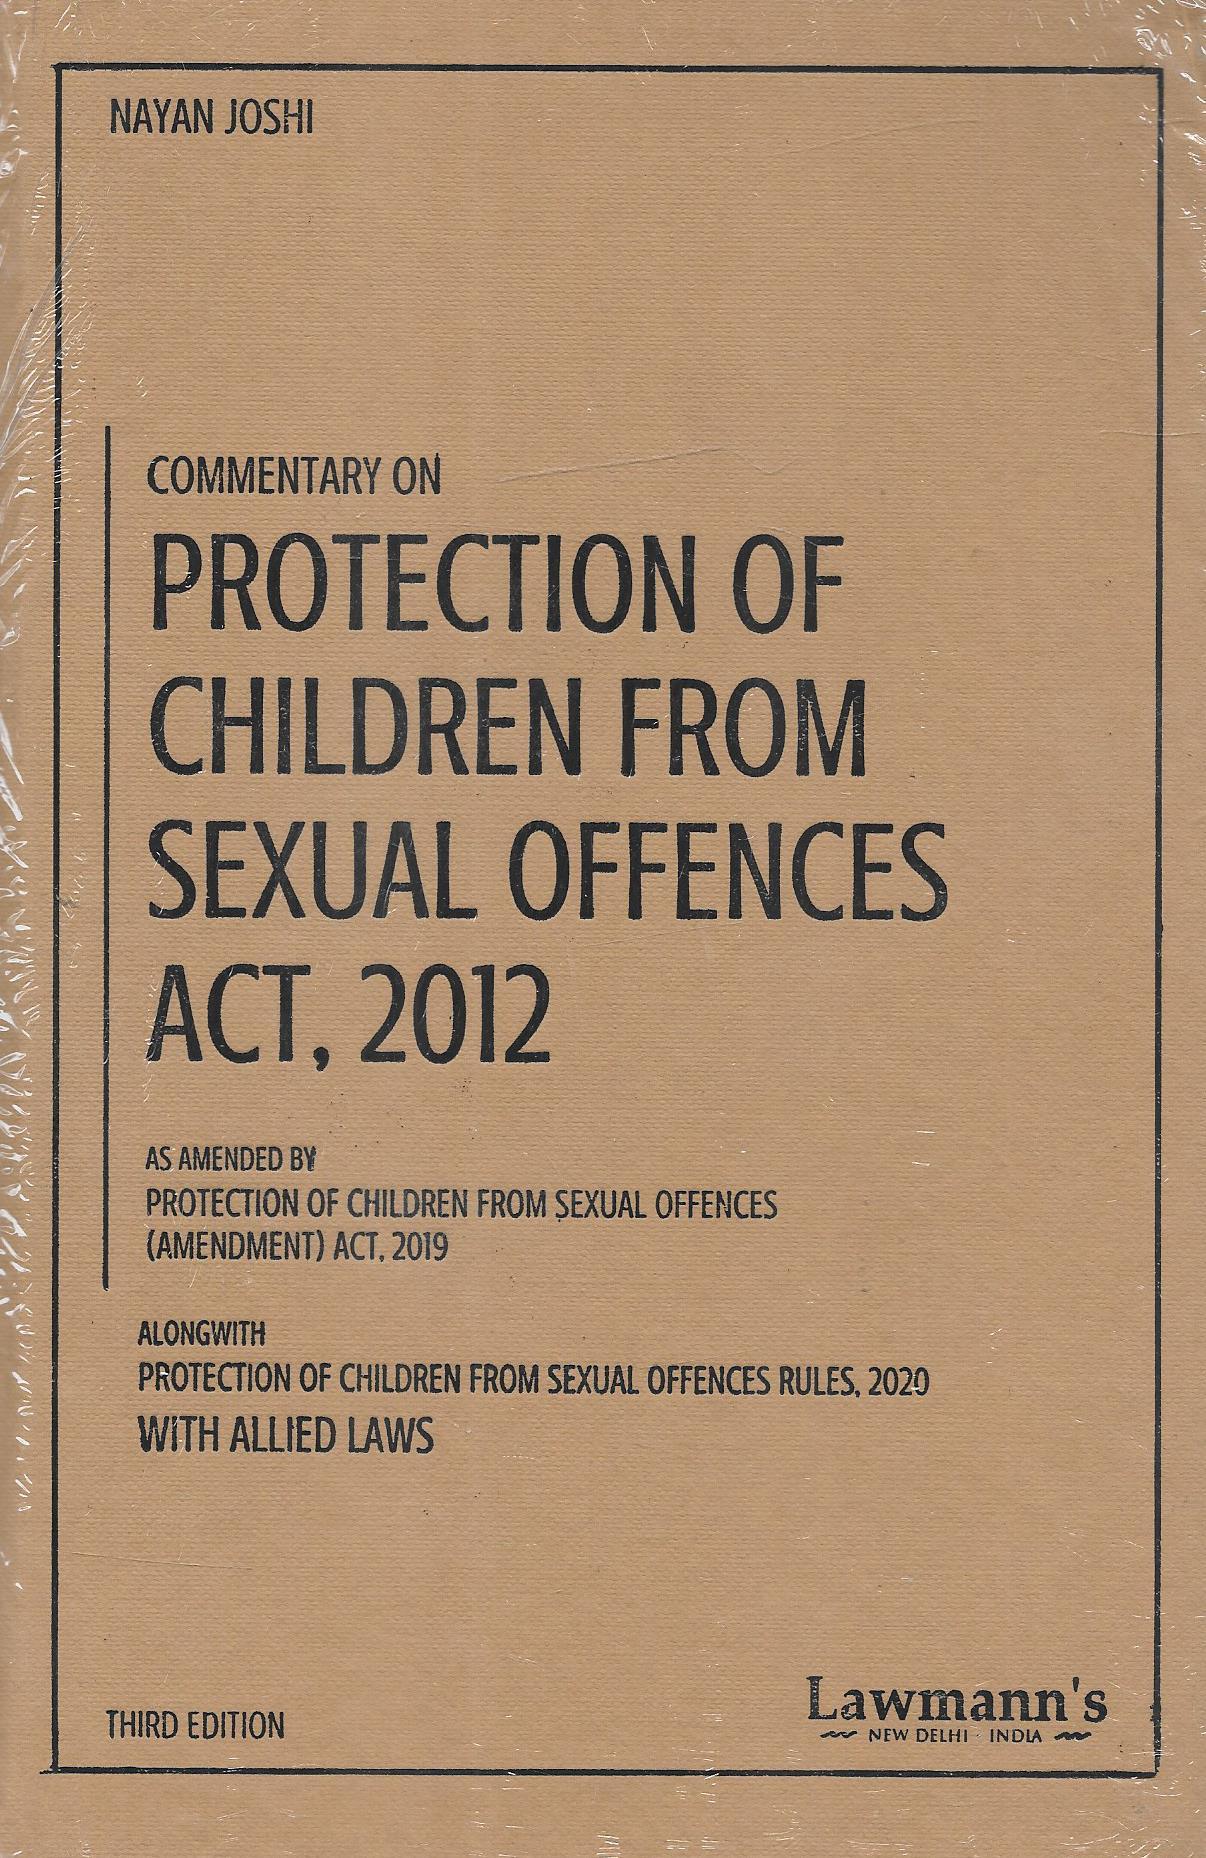 Commentary on Protection of Children from Sexual Offences Act, 2012